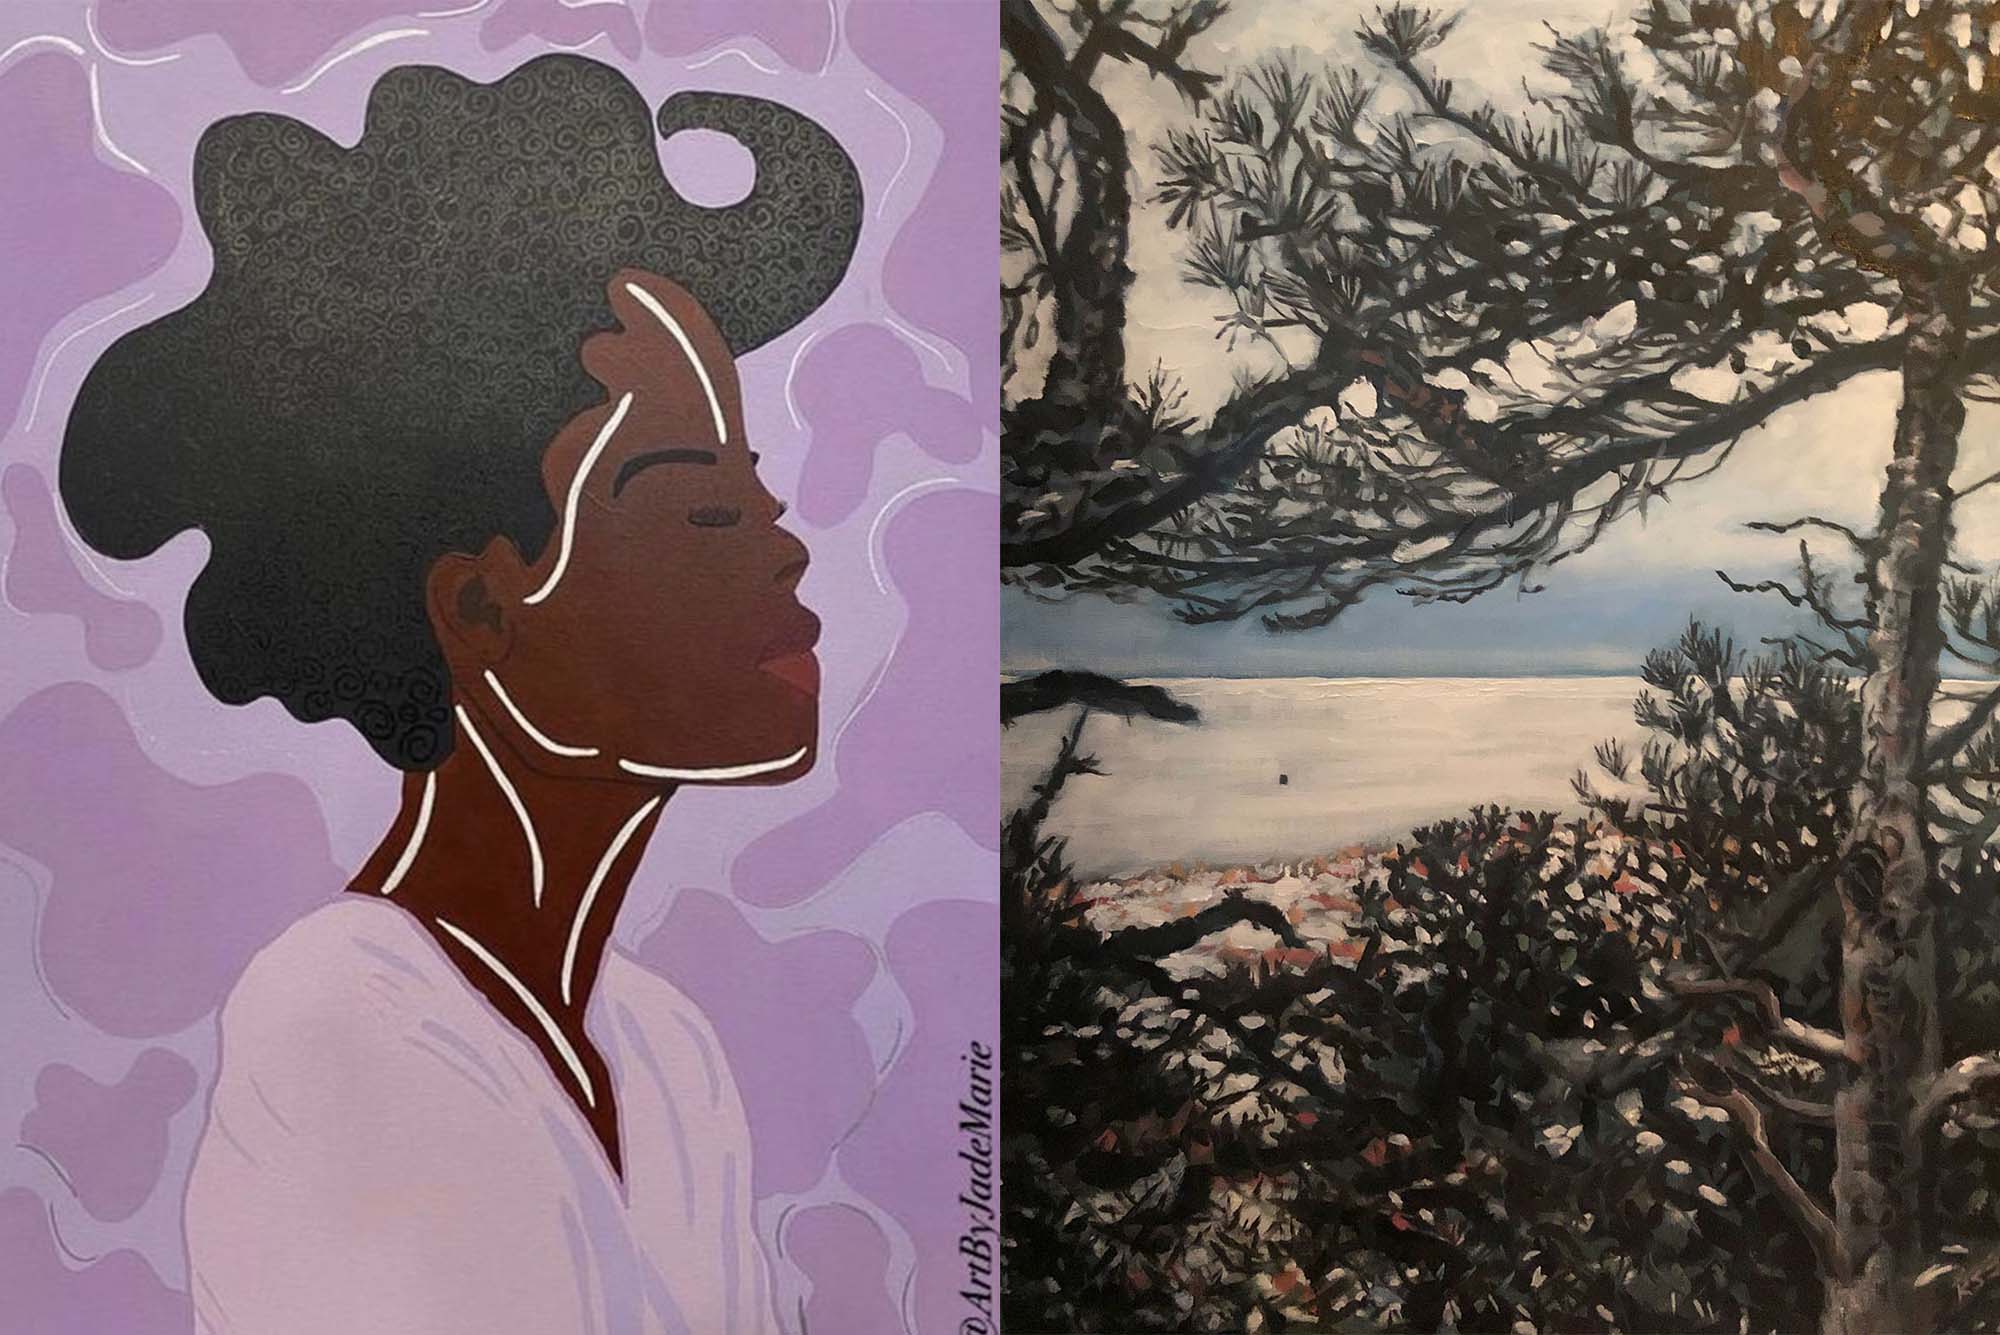 Composite image. At left, photo of a painting by Jade Nortey, featuring an abstract portrait of a Black woman with wavy flowing hair. She smiles contently in front of a purple and pink swirling background. At right, Shaffer's landscape painting which features snowy pines. The sky color is very dull tan and the branches of the pine in the foreground have some snow on them.